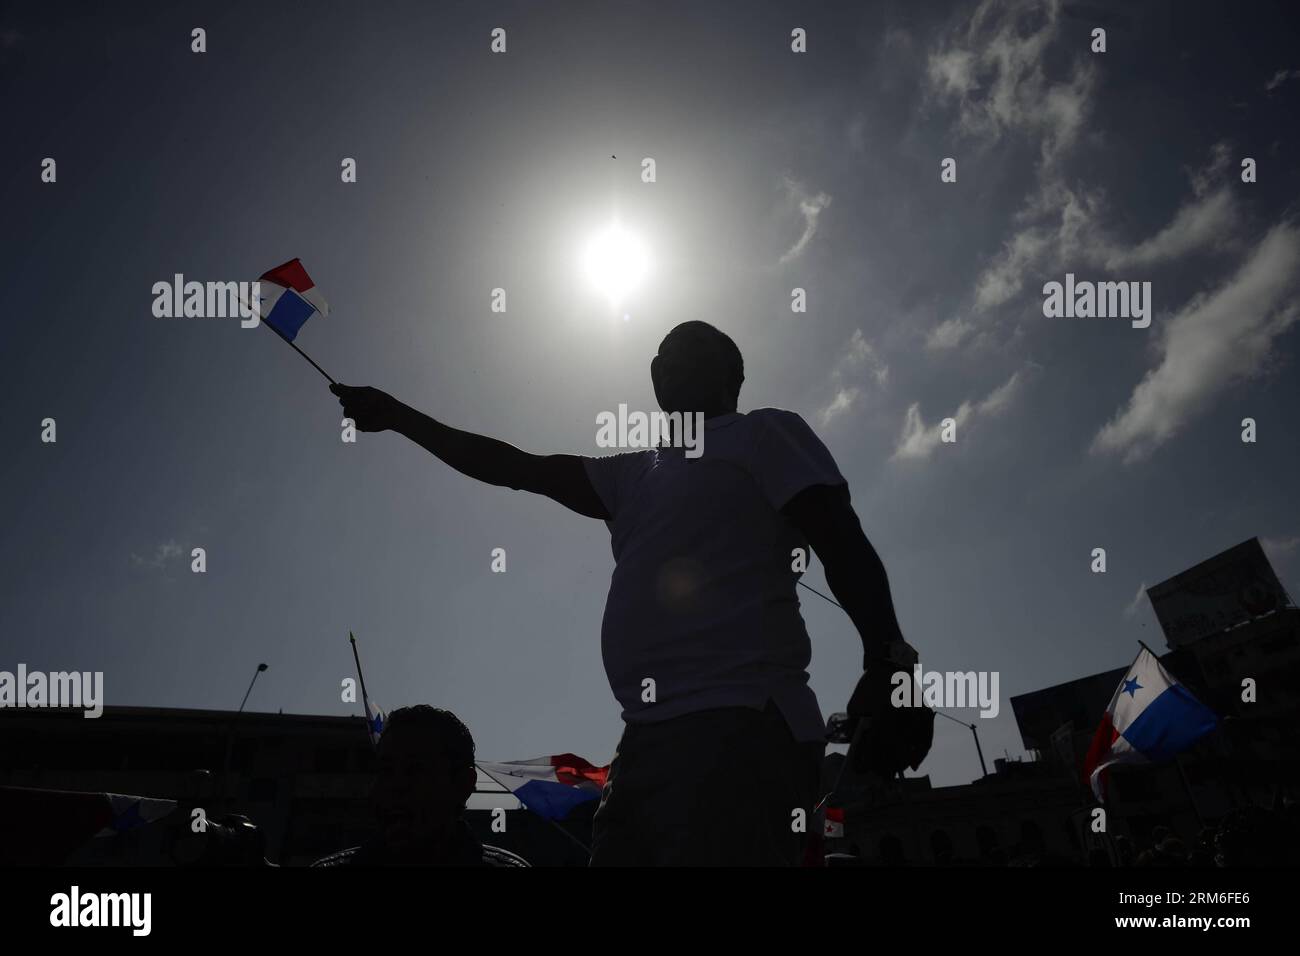 A man waves a Panamanian flag during the commemoration of the Martyrs Day, in Panama City, capital of Panama, on Jan. 9, 2014. The Martyrs Day was a movement occurred in Panama on Jan. 9, 1964, when troops of the U.S. Army clashed with high school students who demanded the right to raise the national flag in the area known as Canal Zone, a strip of land around the Panama Canal, which was ceded to the United States of America in perpetuity as a result of the Hay-Bunau-Varilla Treaty. (Xinhua/Mauricio Valenzuela) PANAMA-PANAMA CITY-MARTYRS DAY-COMMEMORATION PUBLICATIONxNOTxINxCHN   a Man Waves a Stock Photo